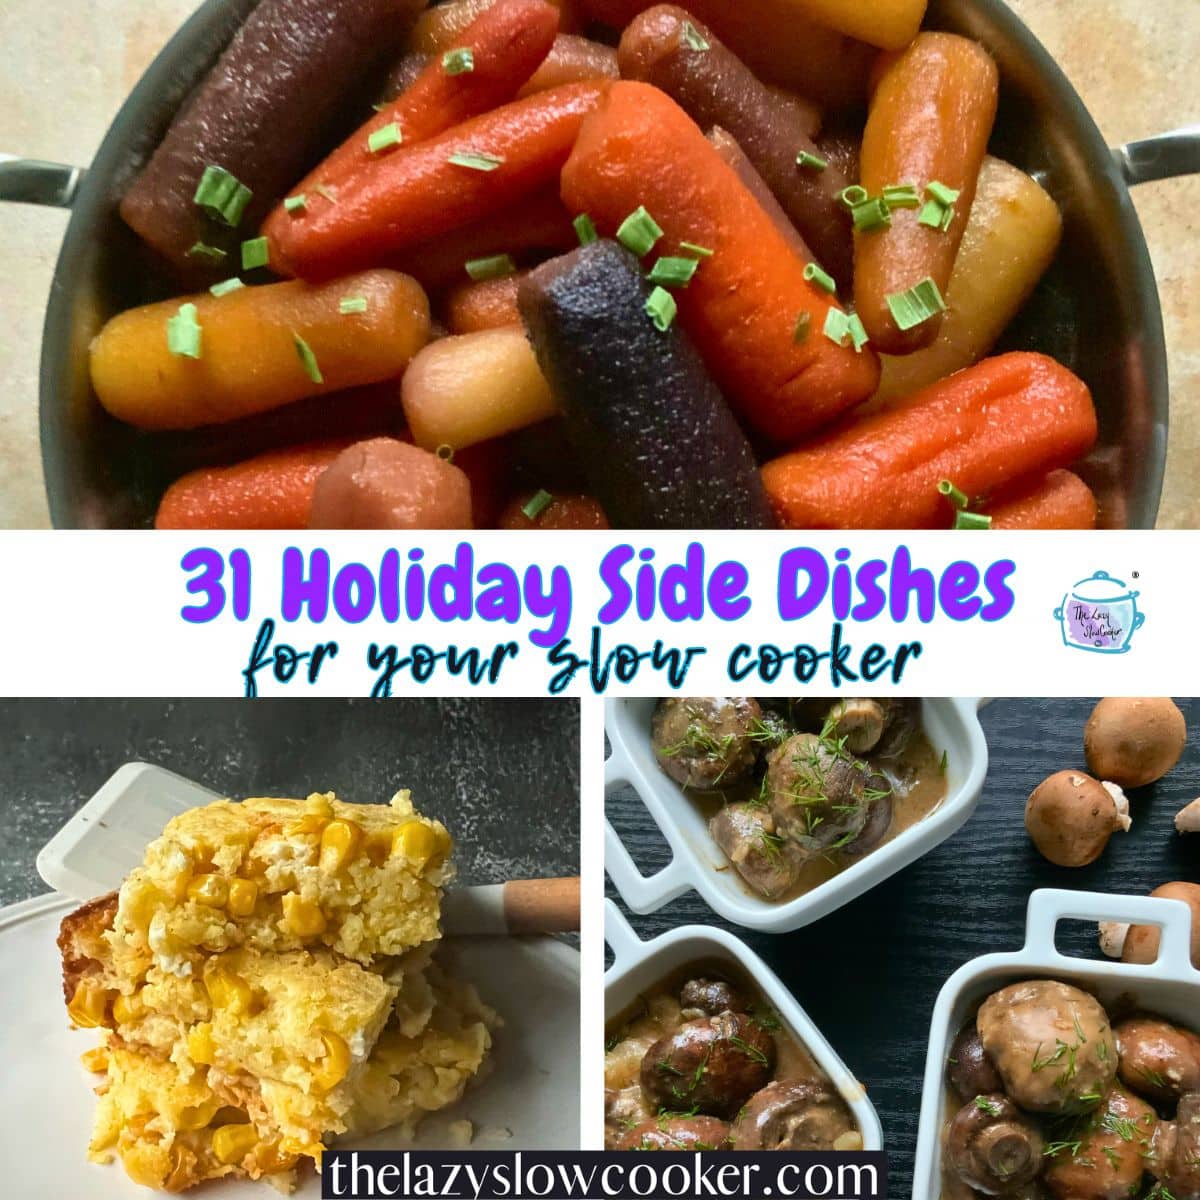 a collage of slow cooker side dishes including carrots, mushrooms and corn bread